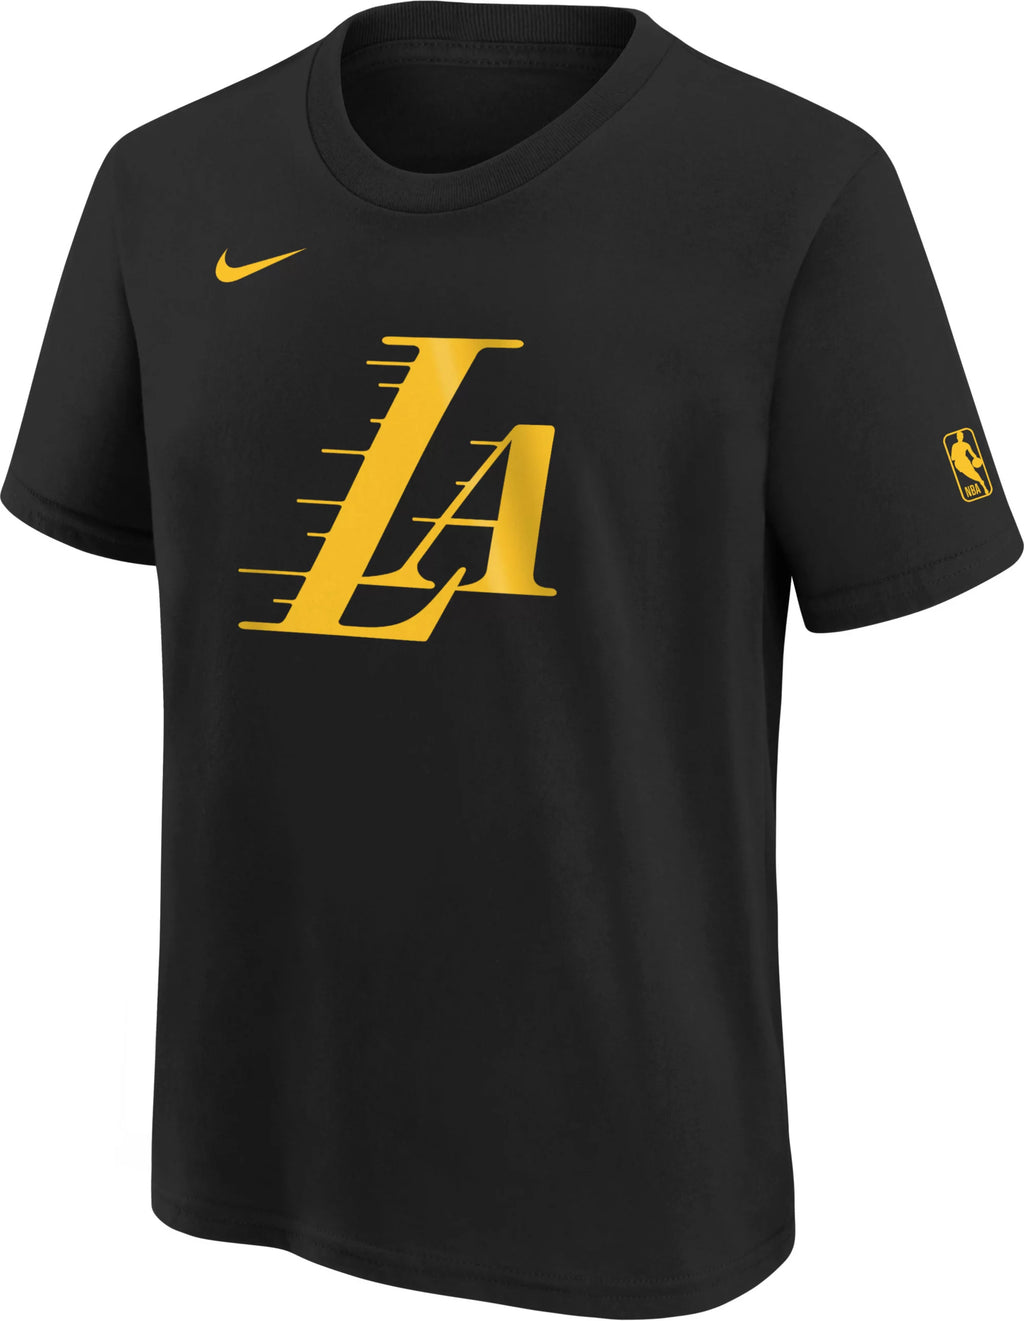 Youth Nike City Edition Essential Logo Tee - Los Angeles Lakers